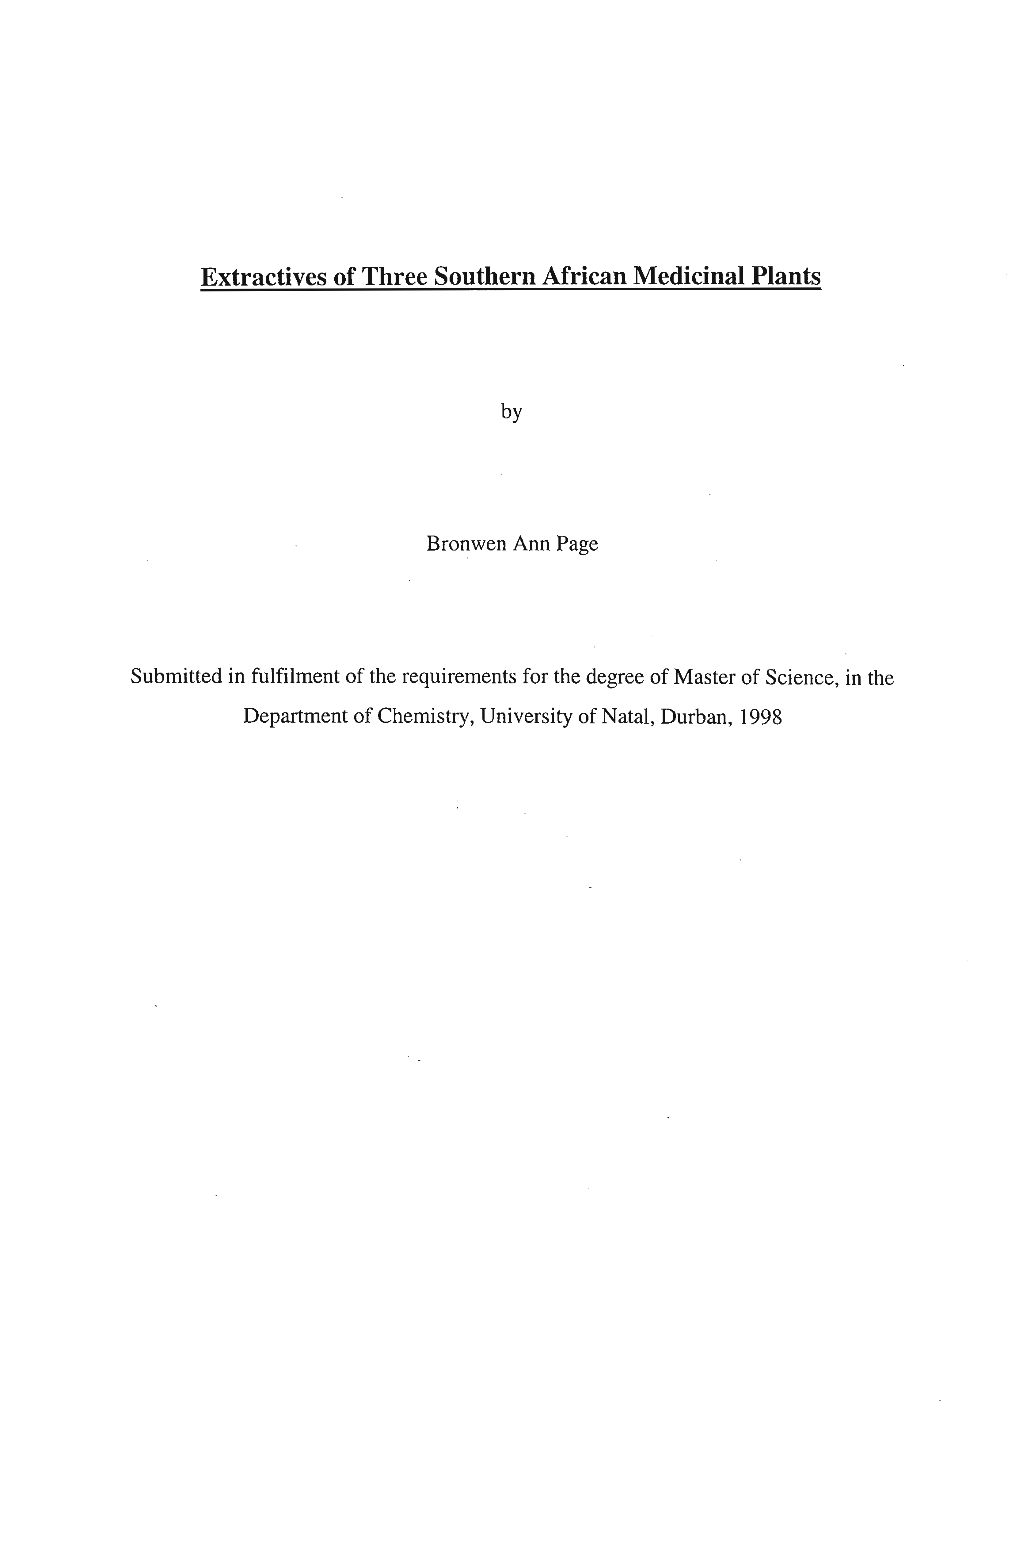 Thesis (8.687Mb)